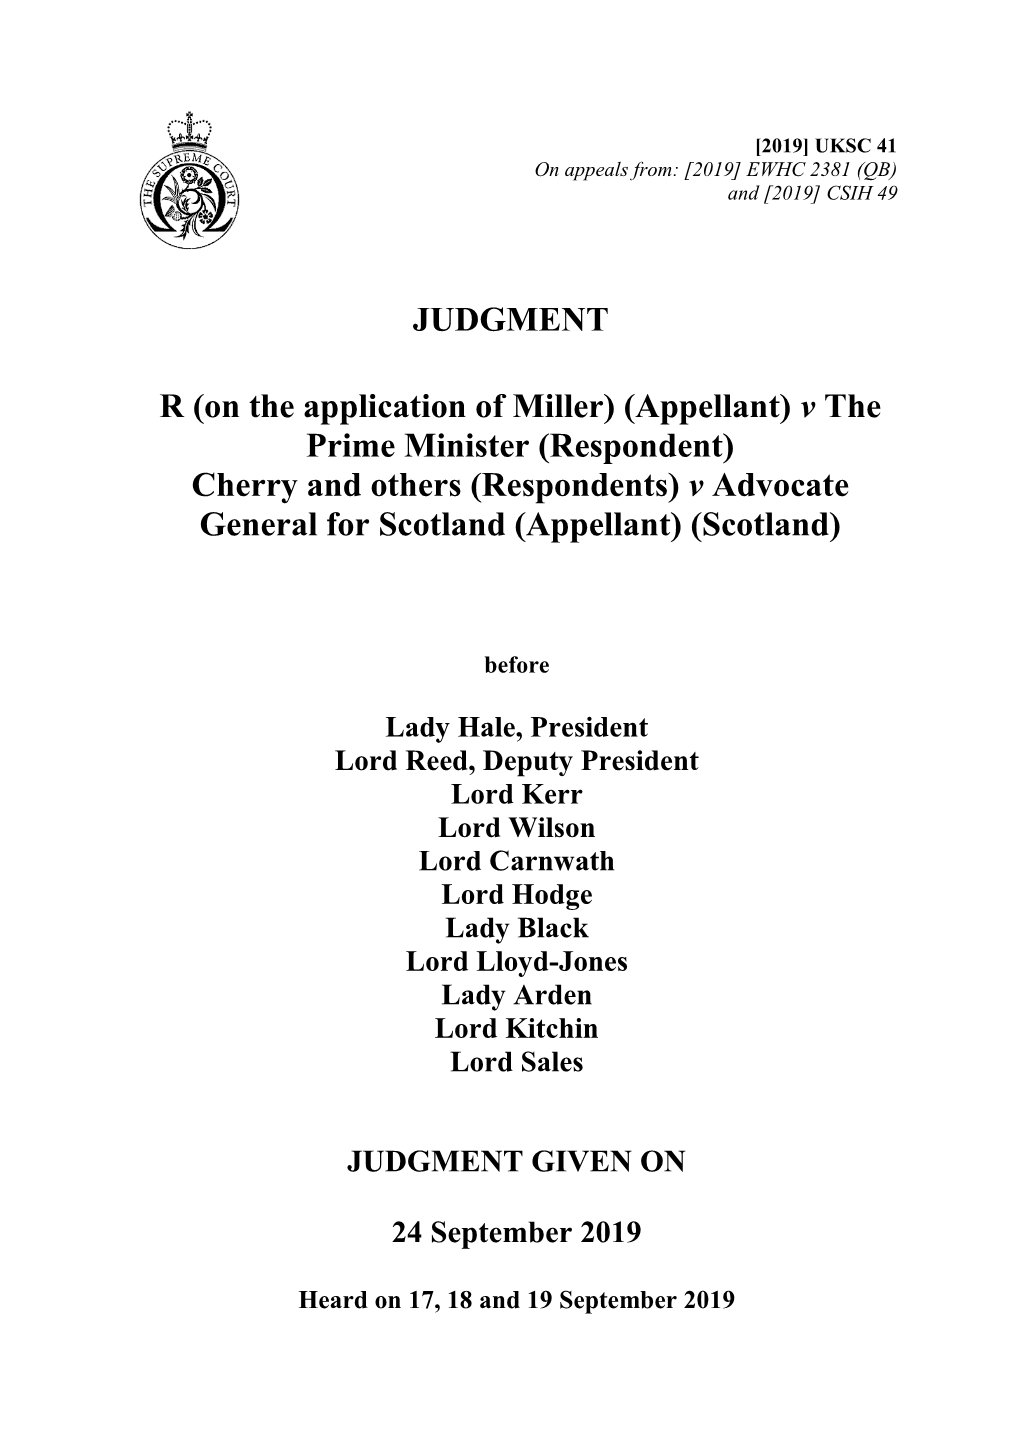 R (On the Application of Miller) (Appellant) V the Prime Minister (Respondent) and Cherry and Others (Respondents) V Advocate Ge